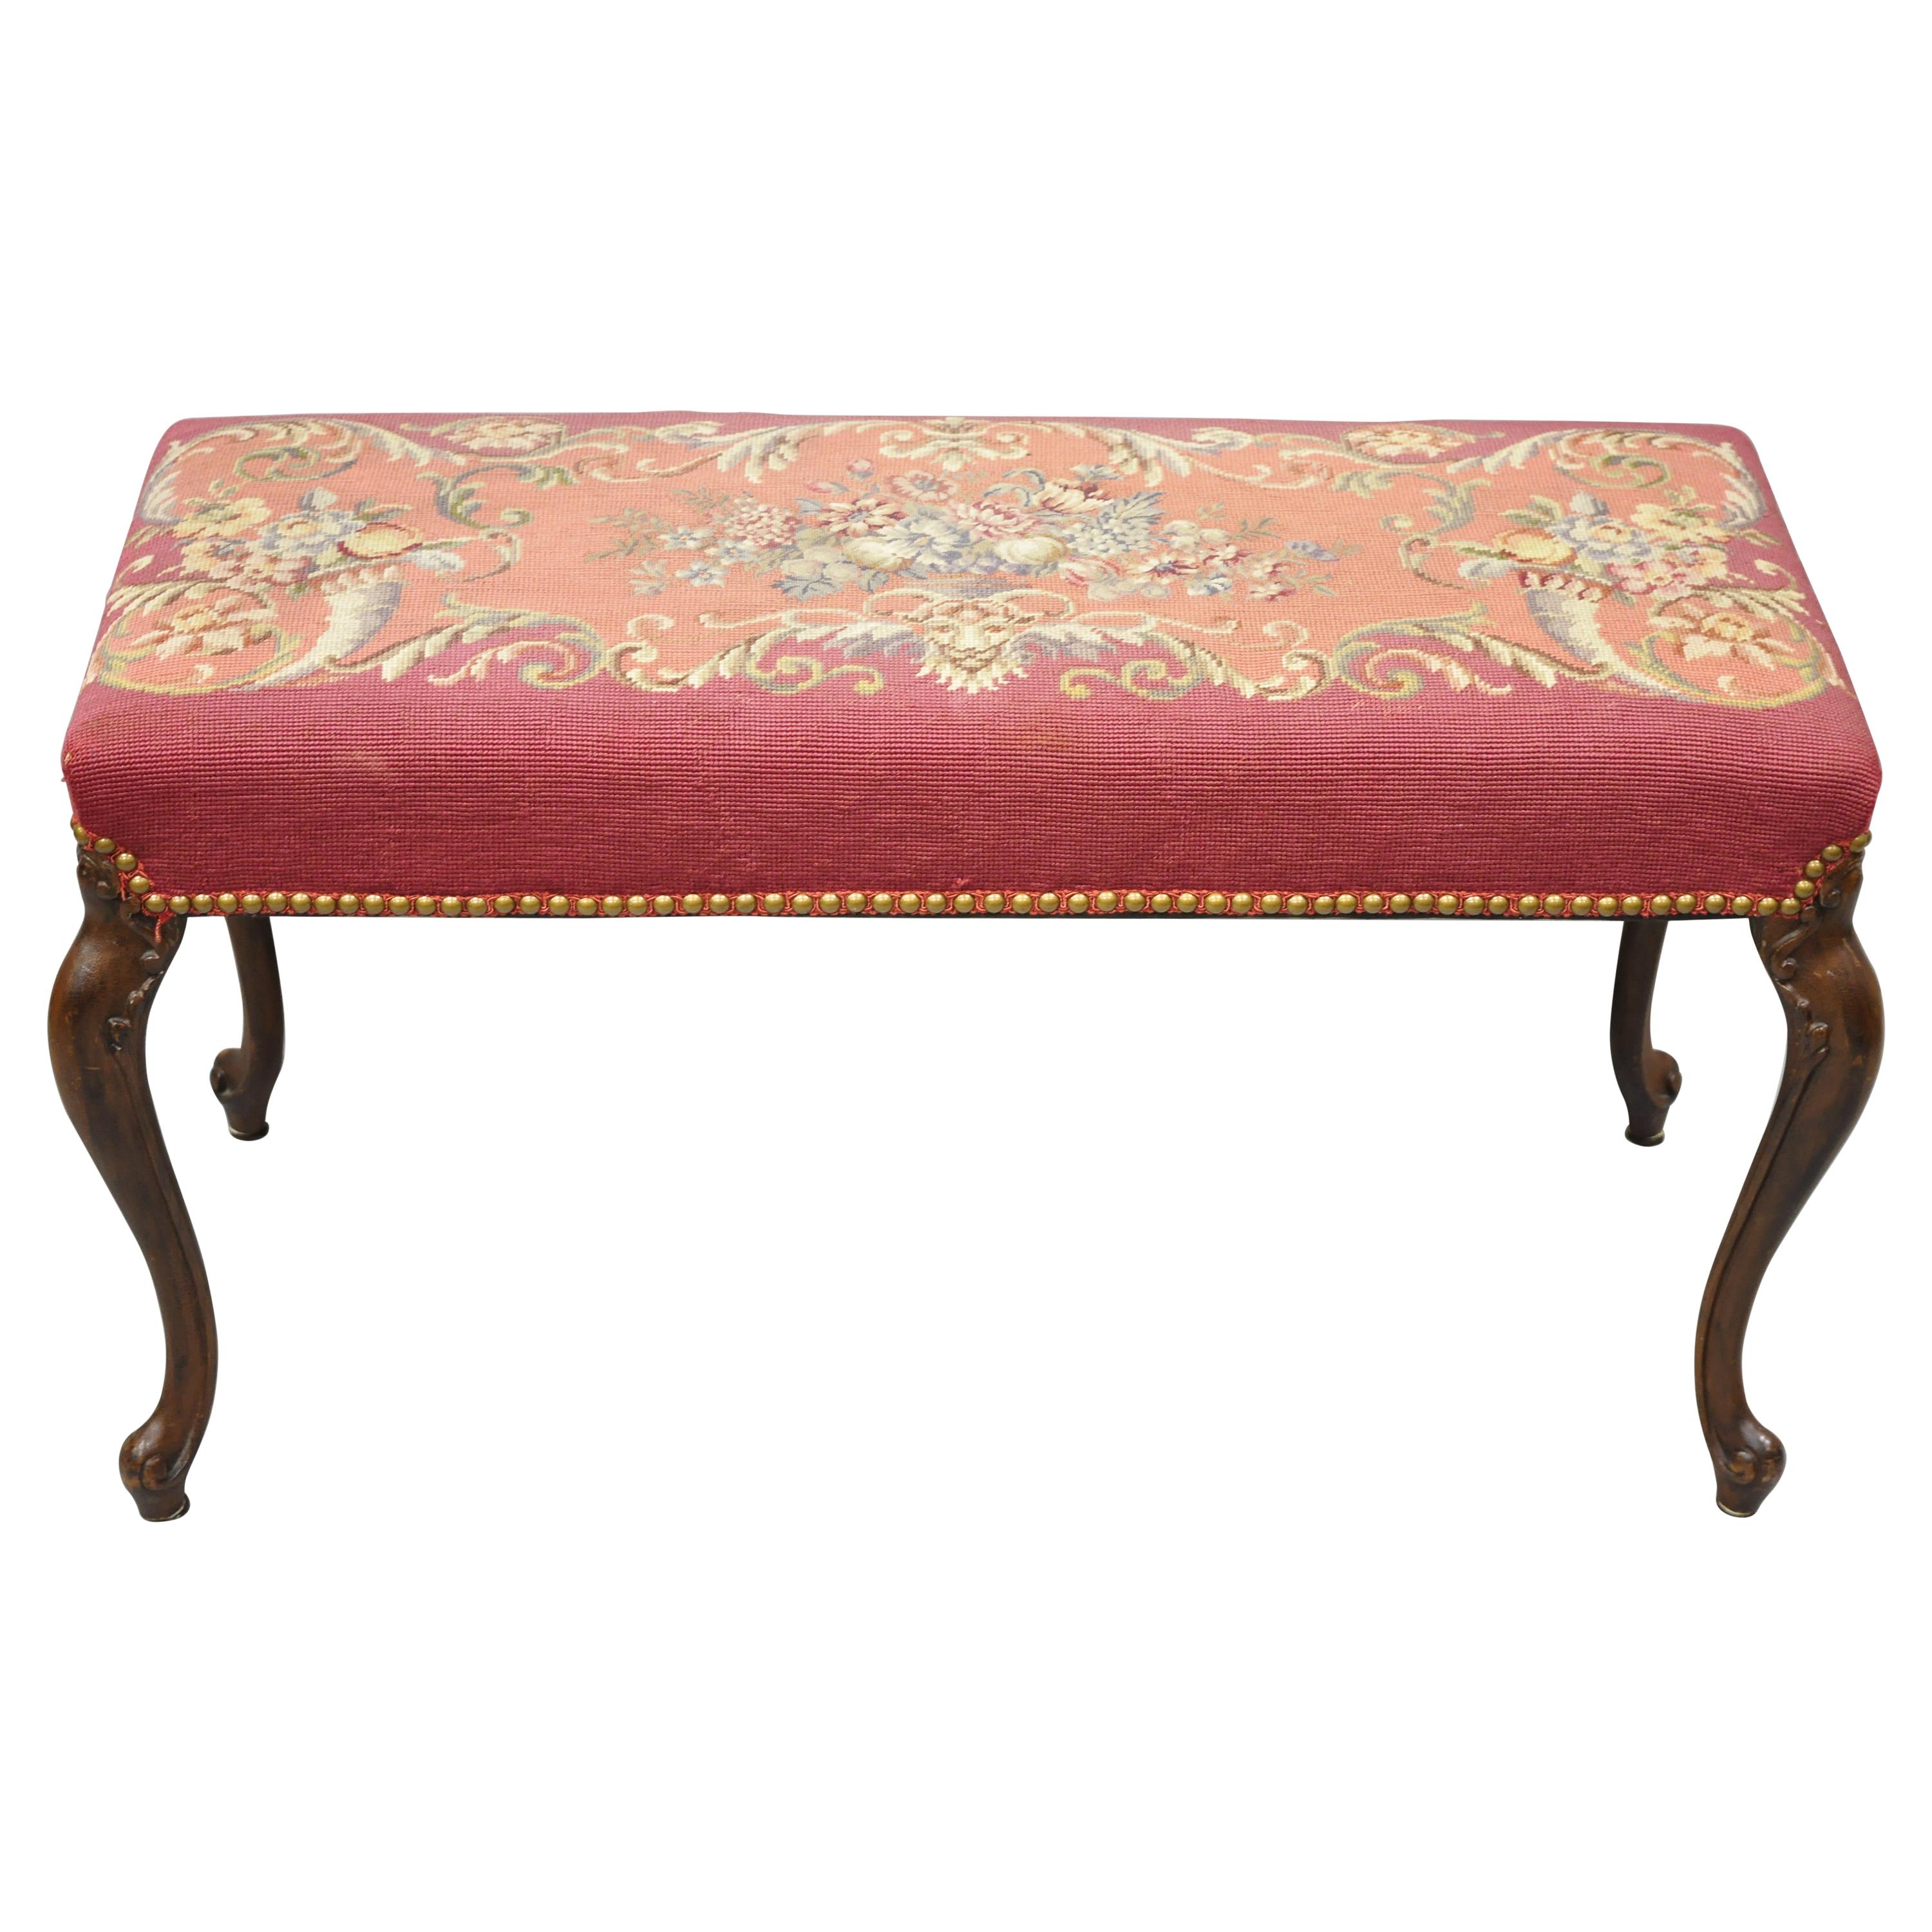 Antique French Victorian Pink Floral Needlepoint Mahogany Cabriole Leg Bench